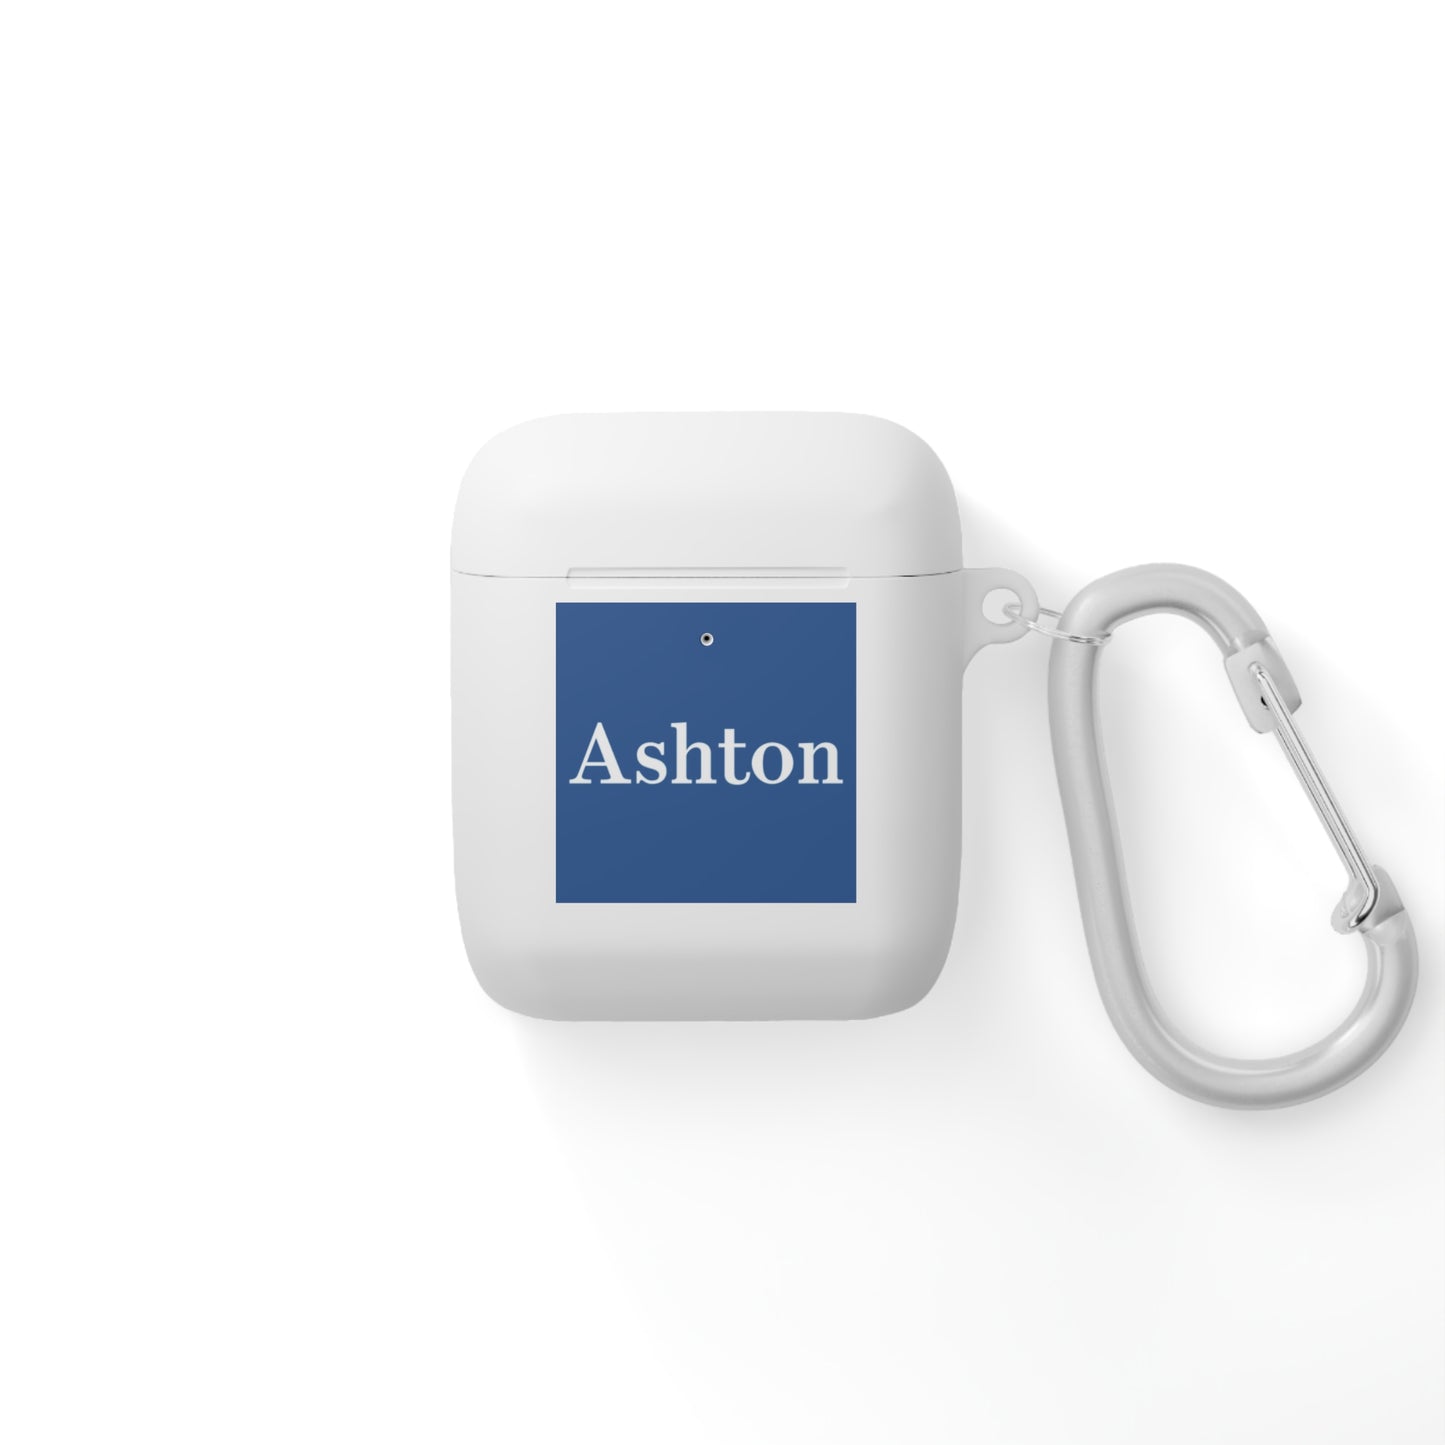 Ashton AirPods and AirPods Pro Case Cover